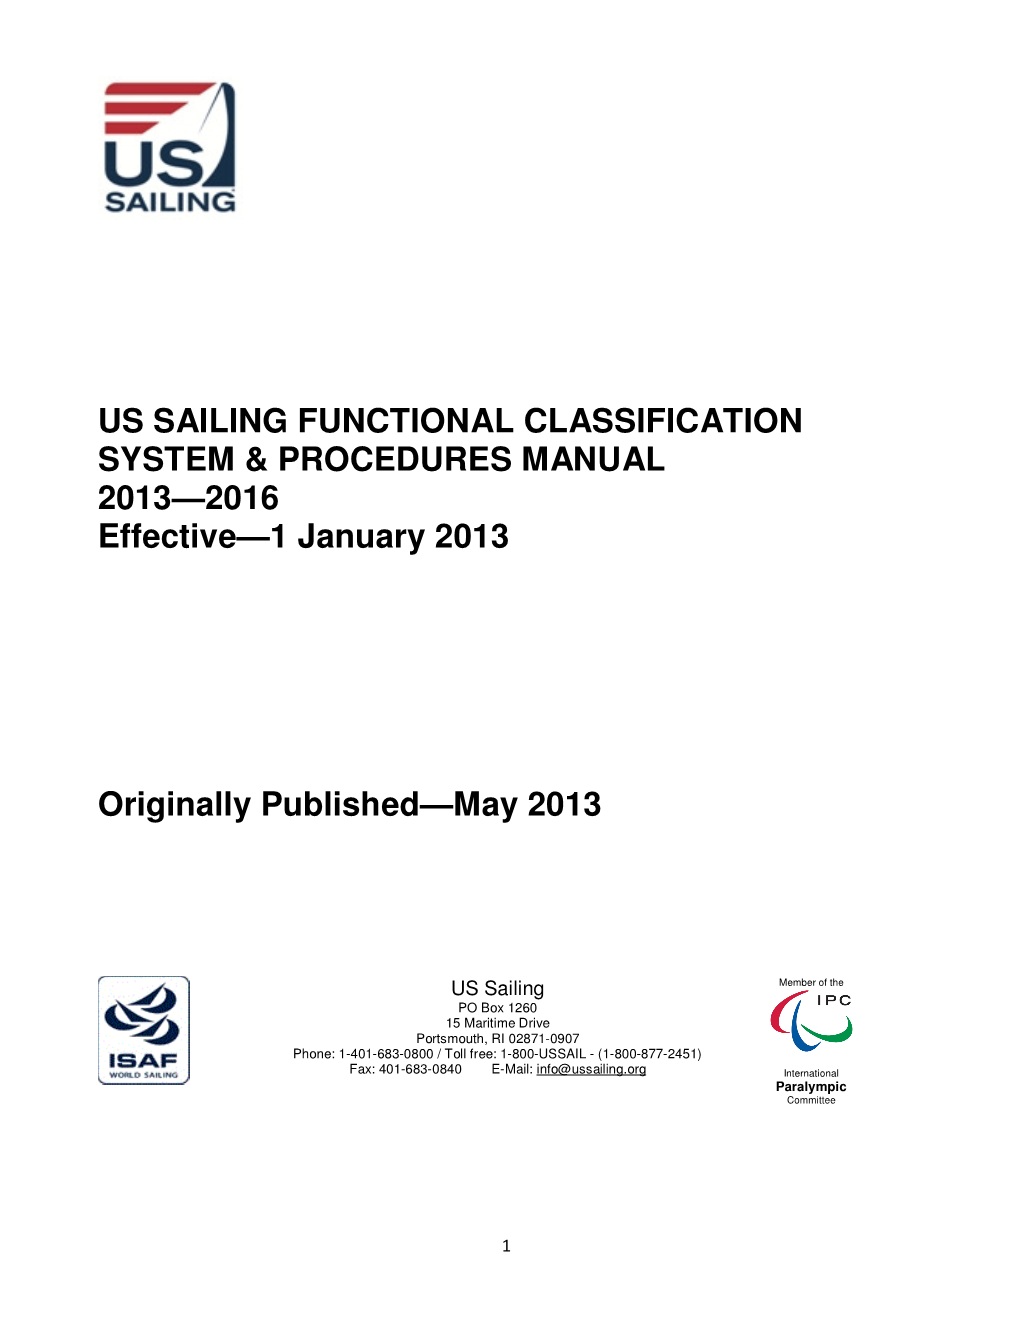 US SAILING FUNCTIONAL CLASSIFICATION SYSTEM & PROCEDURES MANUAL 2013—2016 Effective—1 January 2013